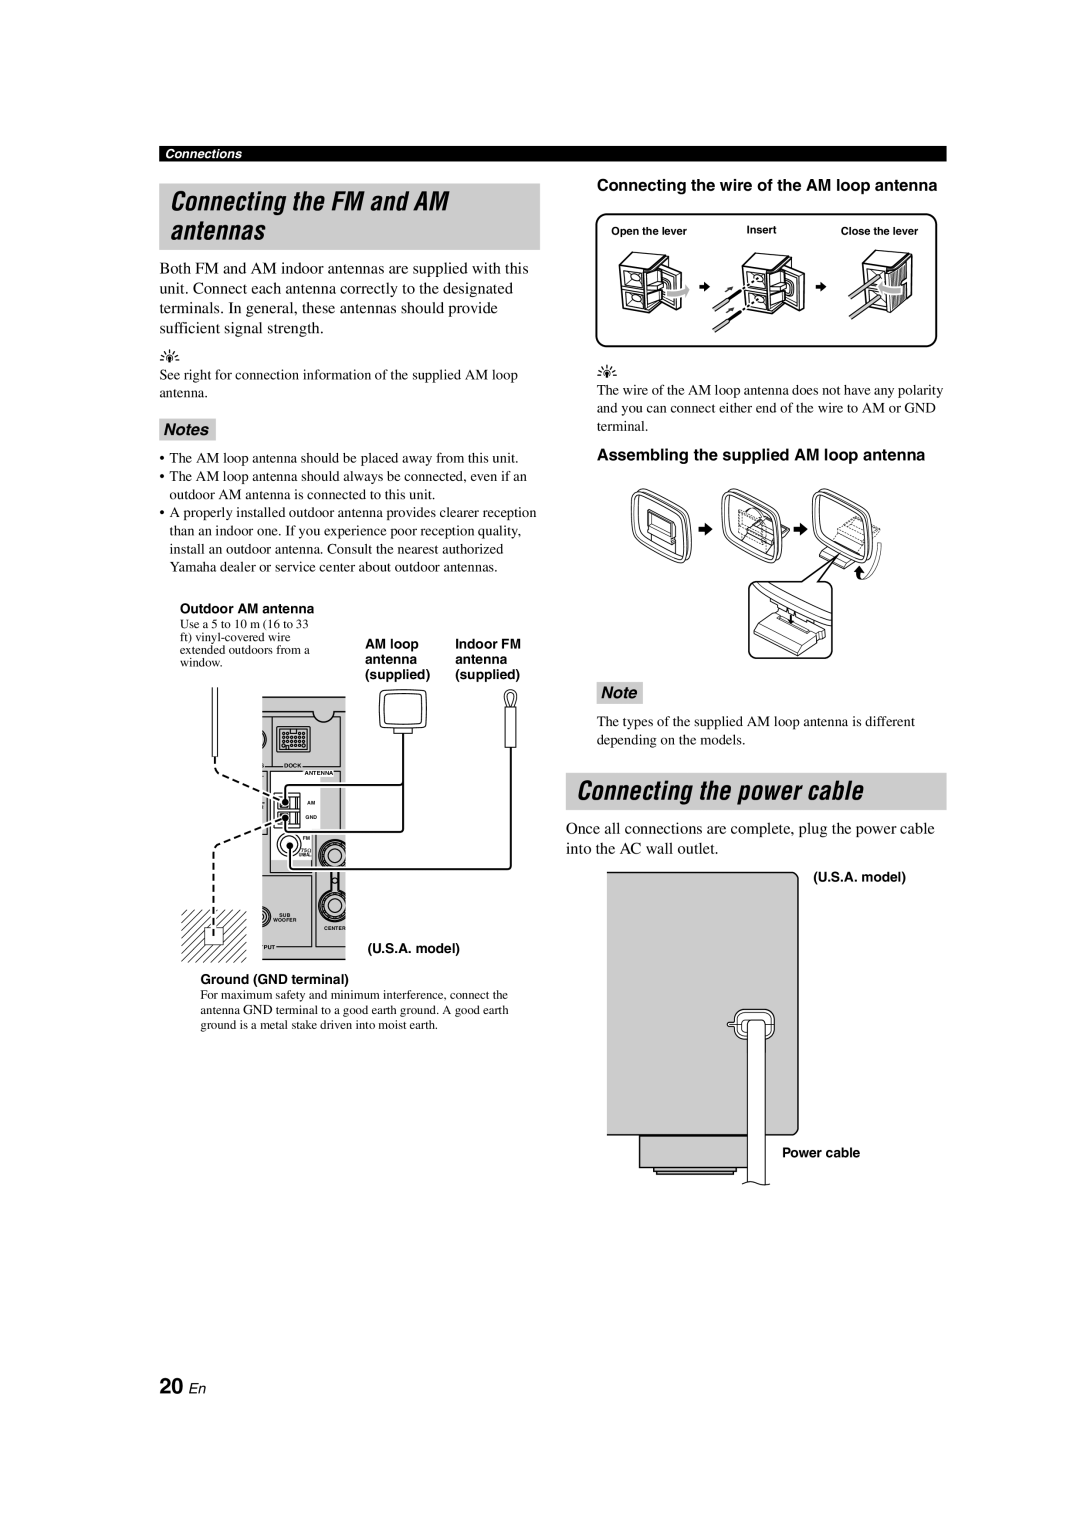 Yamaha HTR-6140 owner manual Connecting the FM and AM antennas, Connecting the power cable, 20 En, Notes 